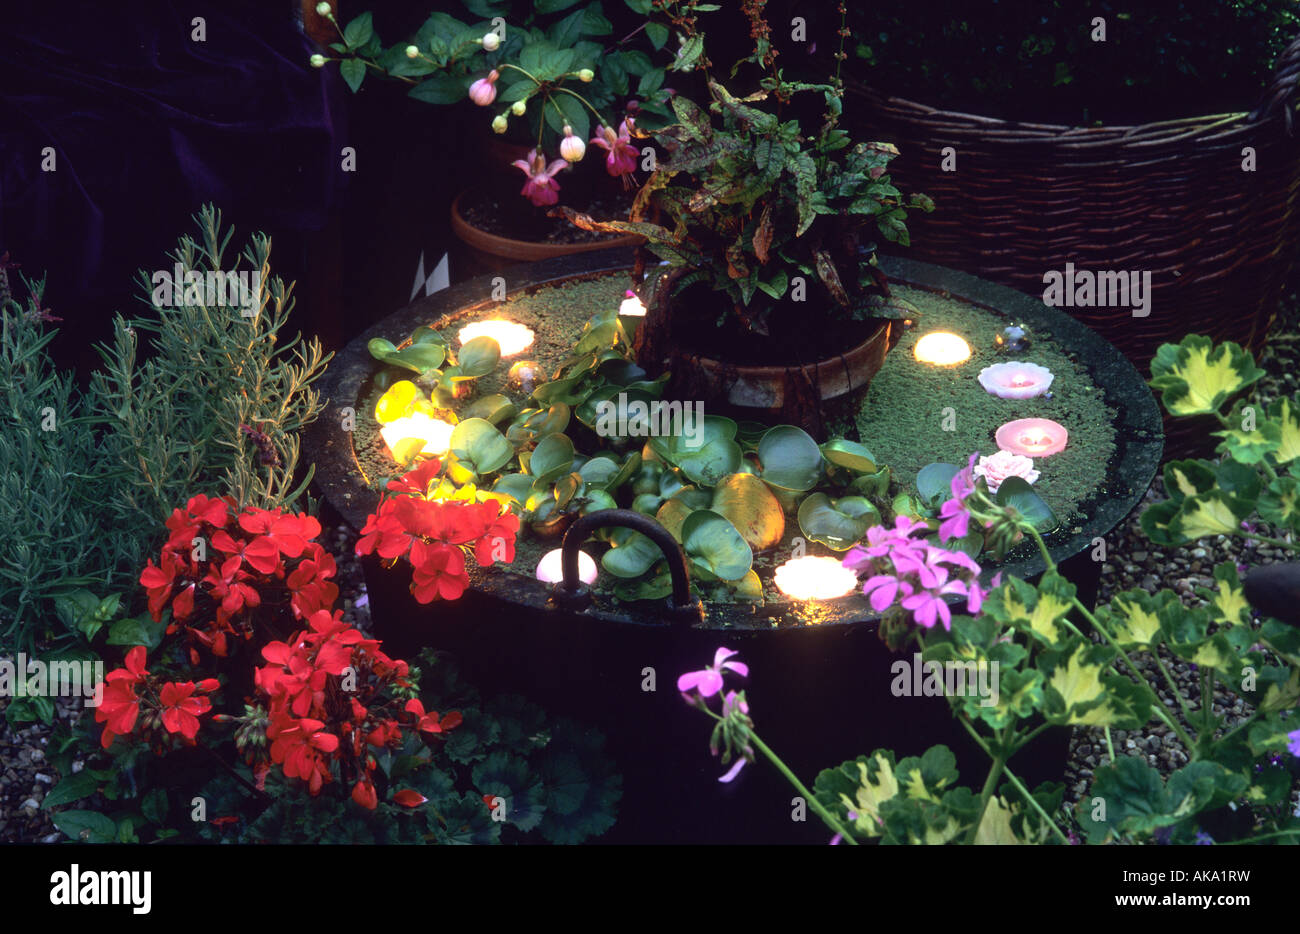 Woodside Rd Chester Garden Lighting Candles in pots floating in water feature Stock Photo